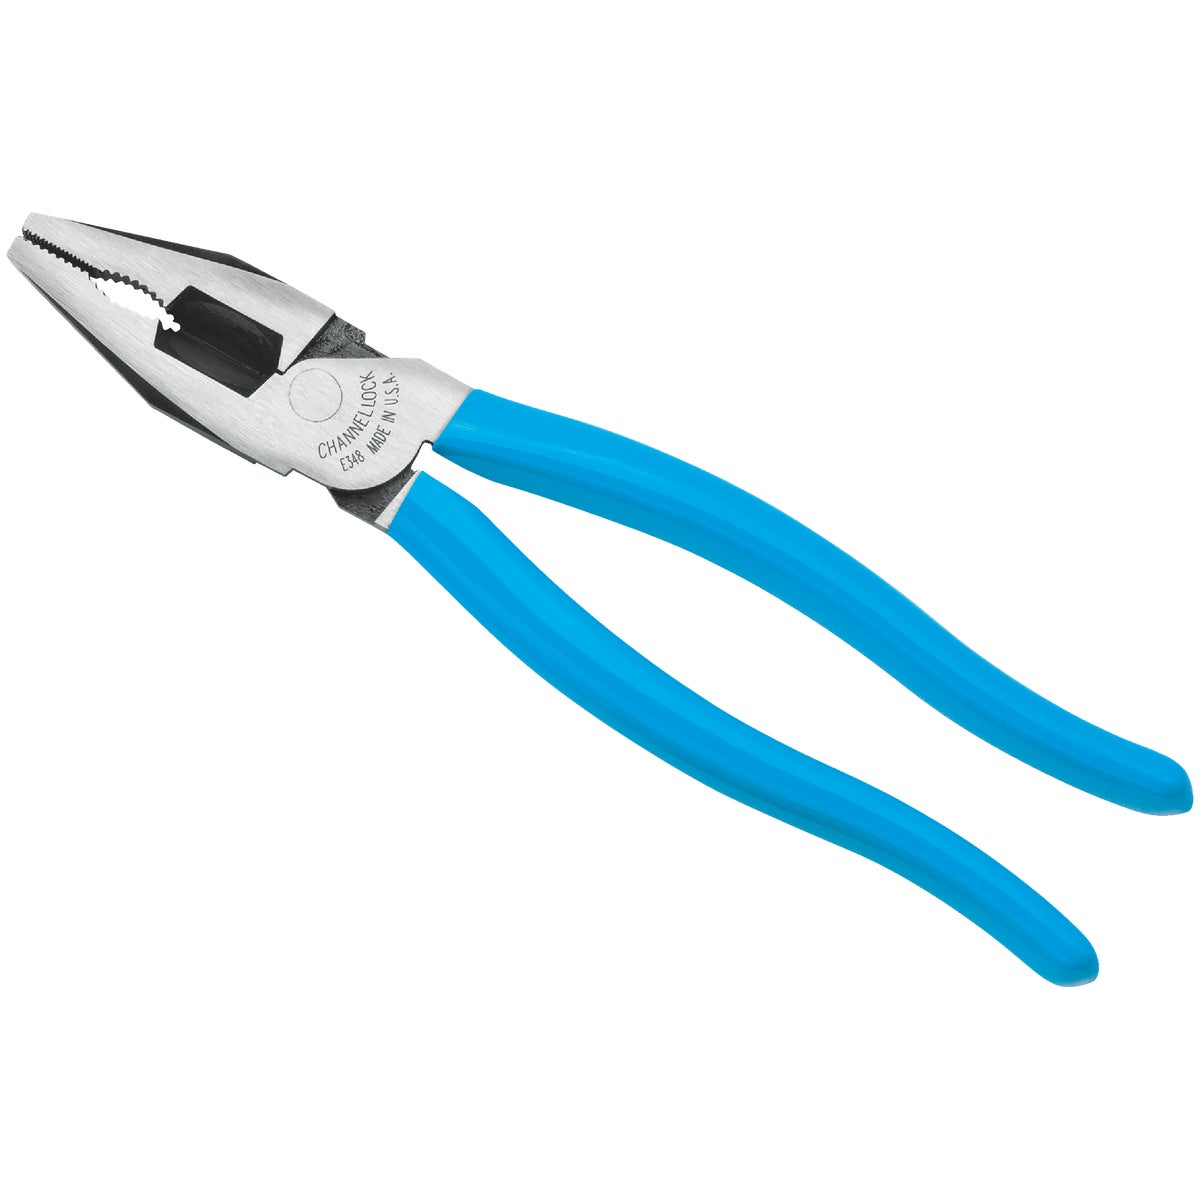 Channellock XLT 8 In. High Carbon Steel Combination Linesman Pliers